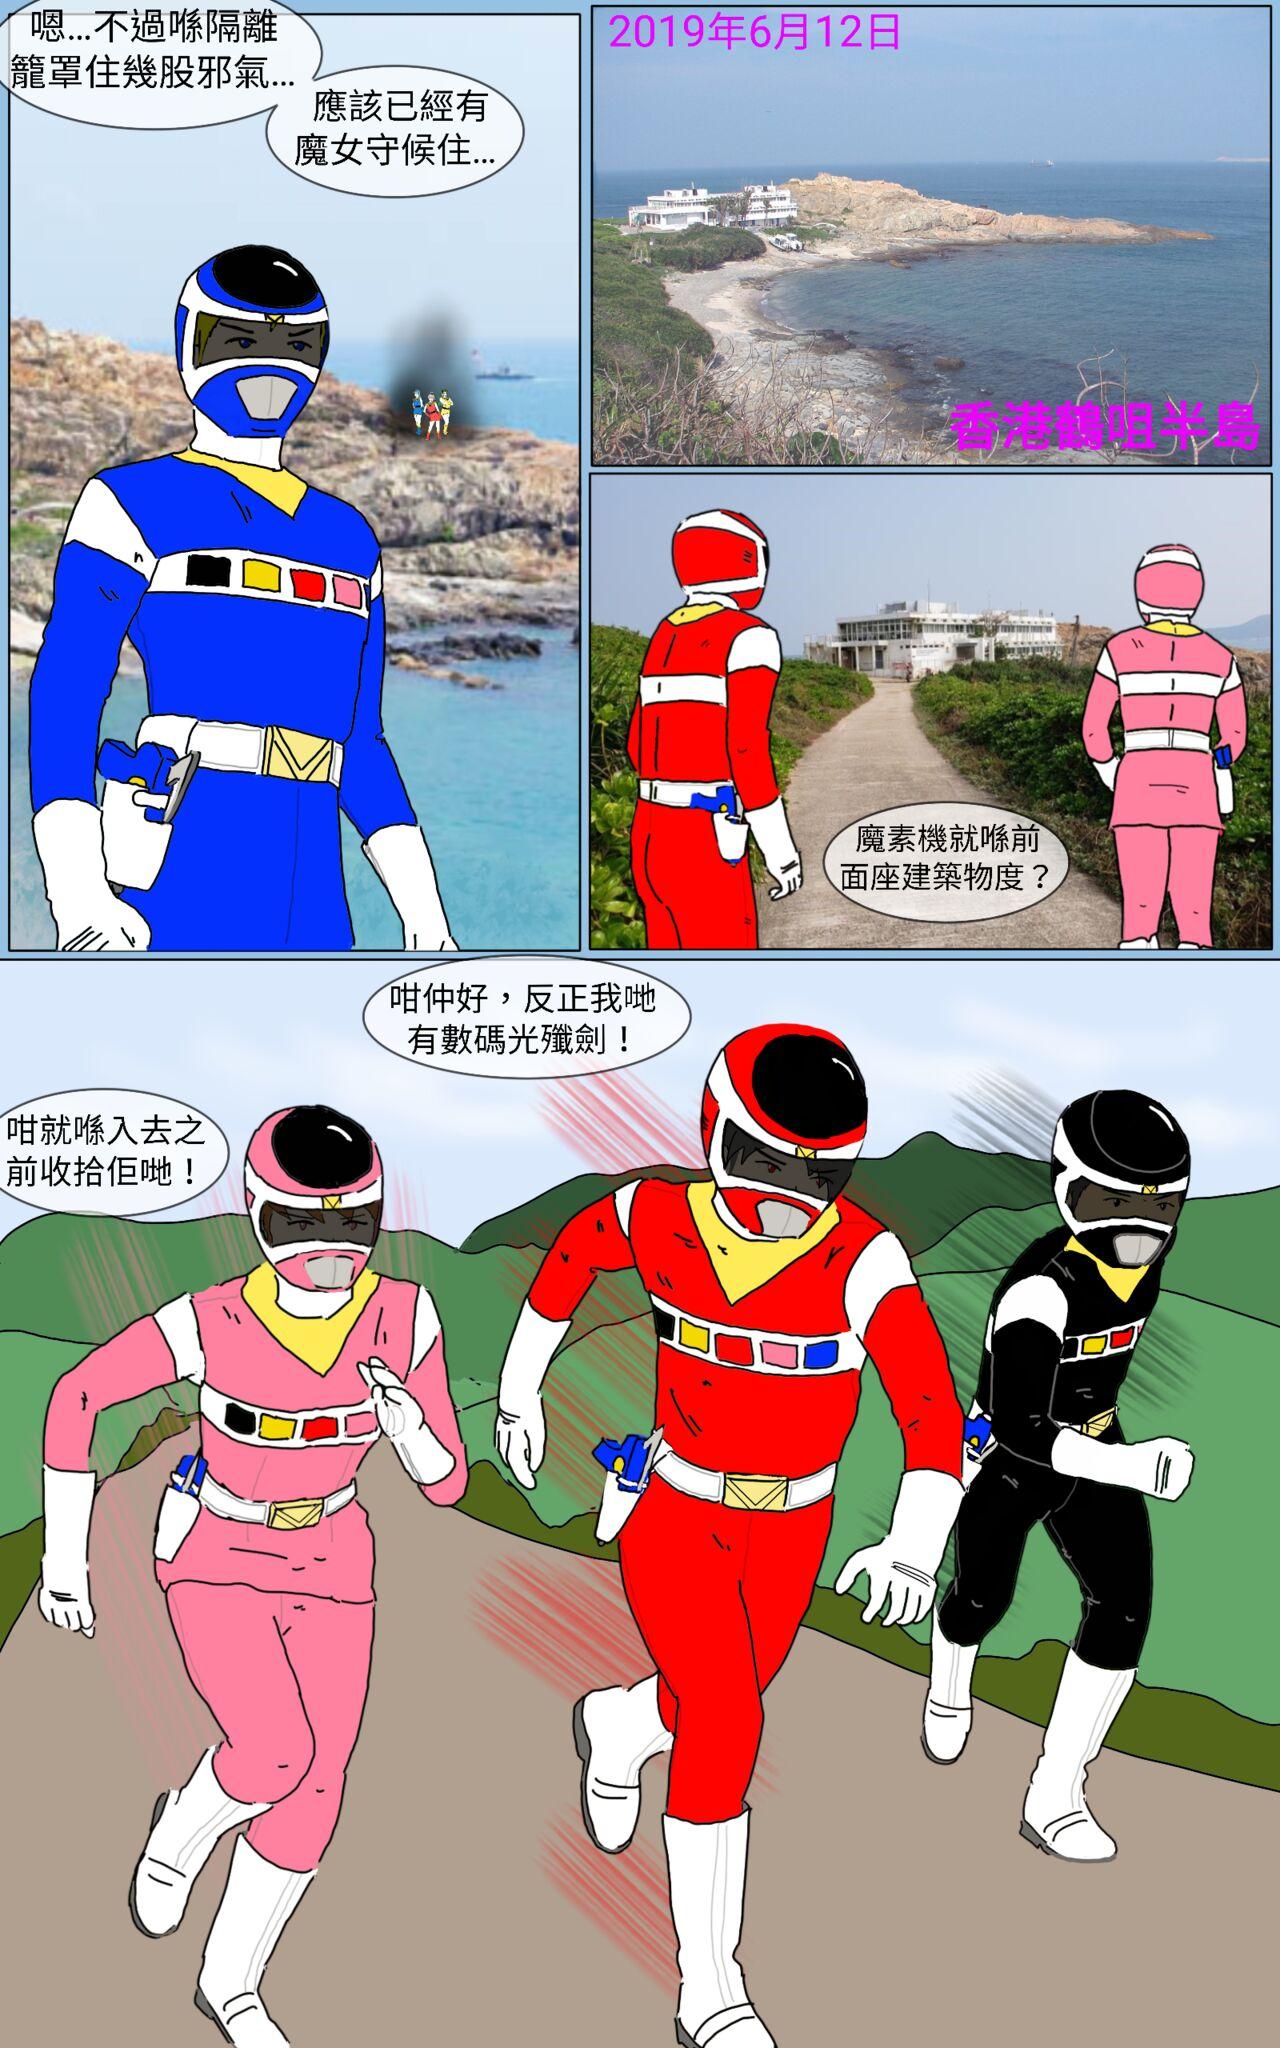 Monster Mission 16 - Super sentai Gay Bus - Page 6